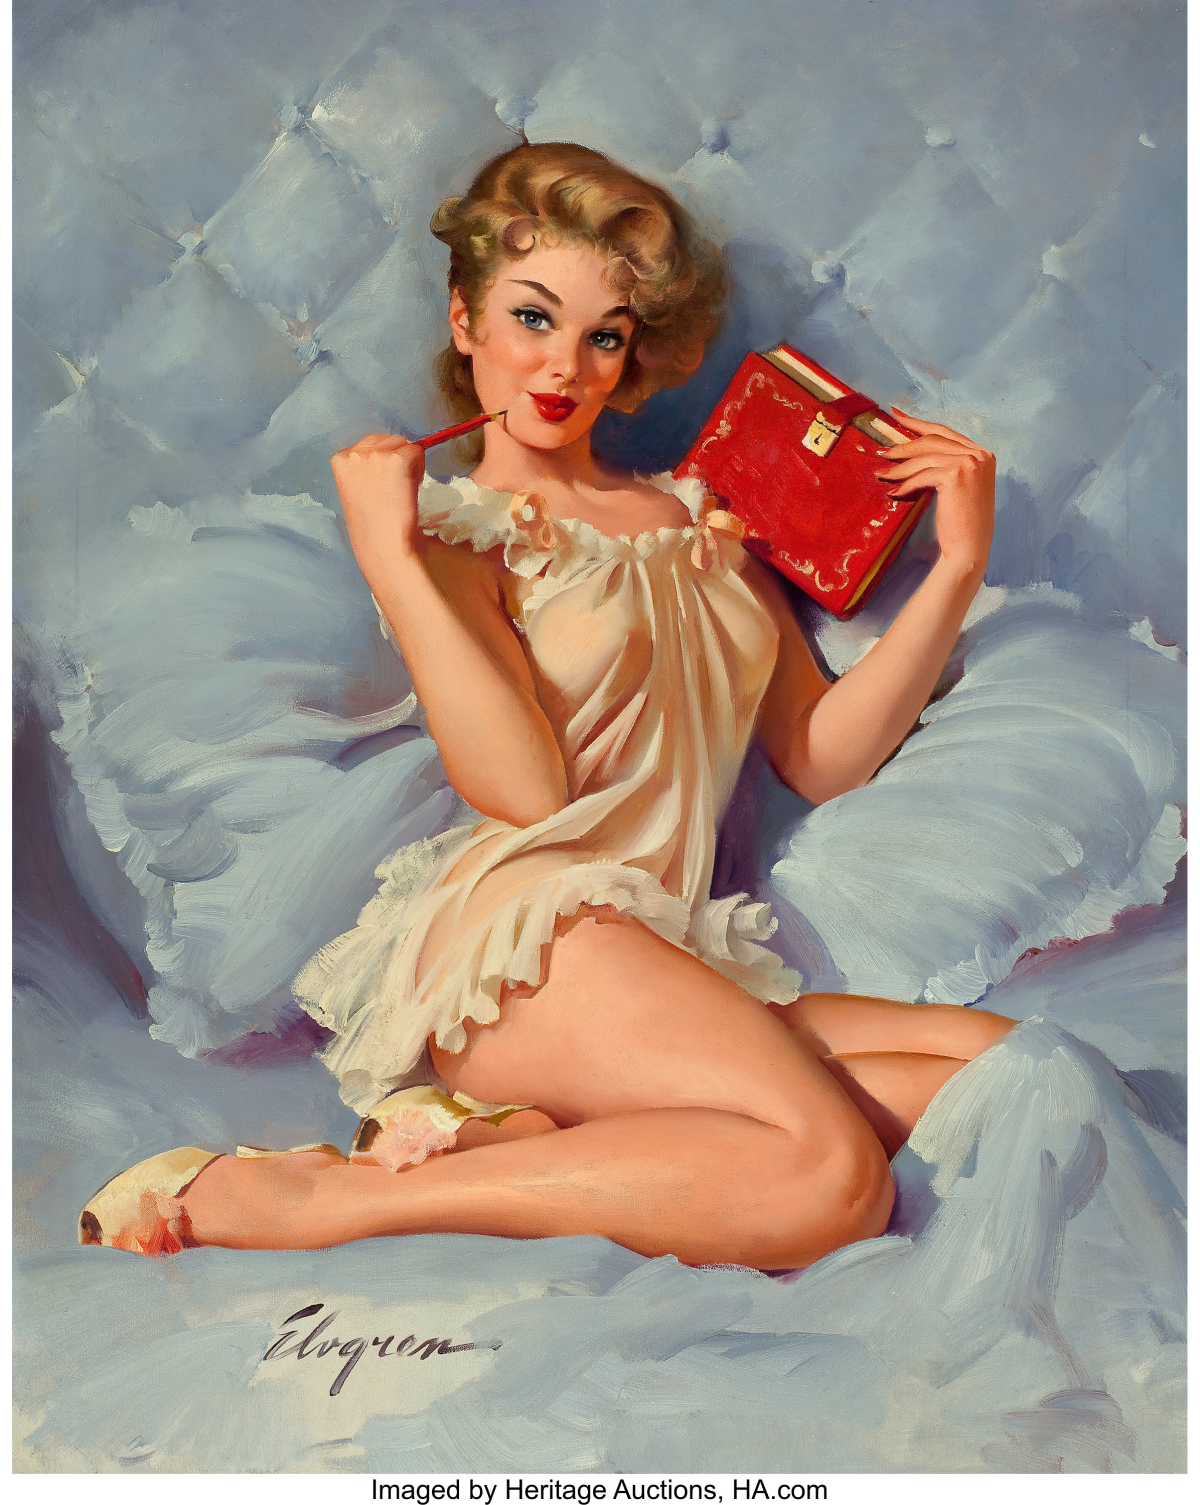 The Glamorous History Of Pin-Up, From Kitsch To Commercial 